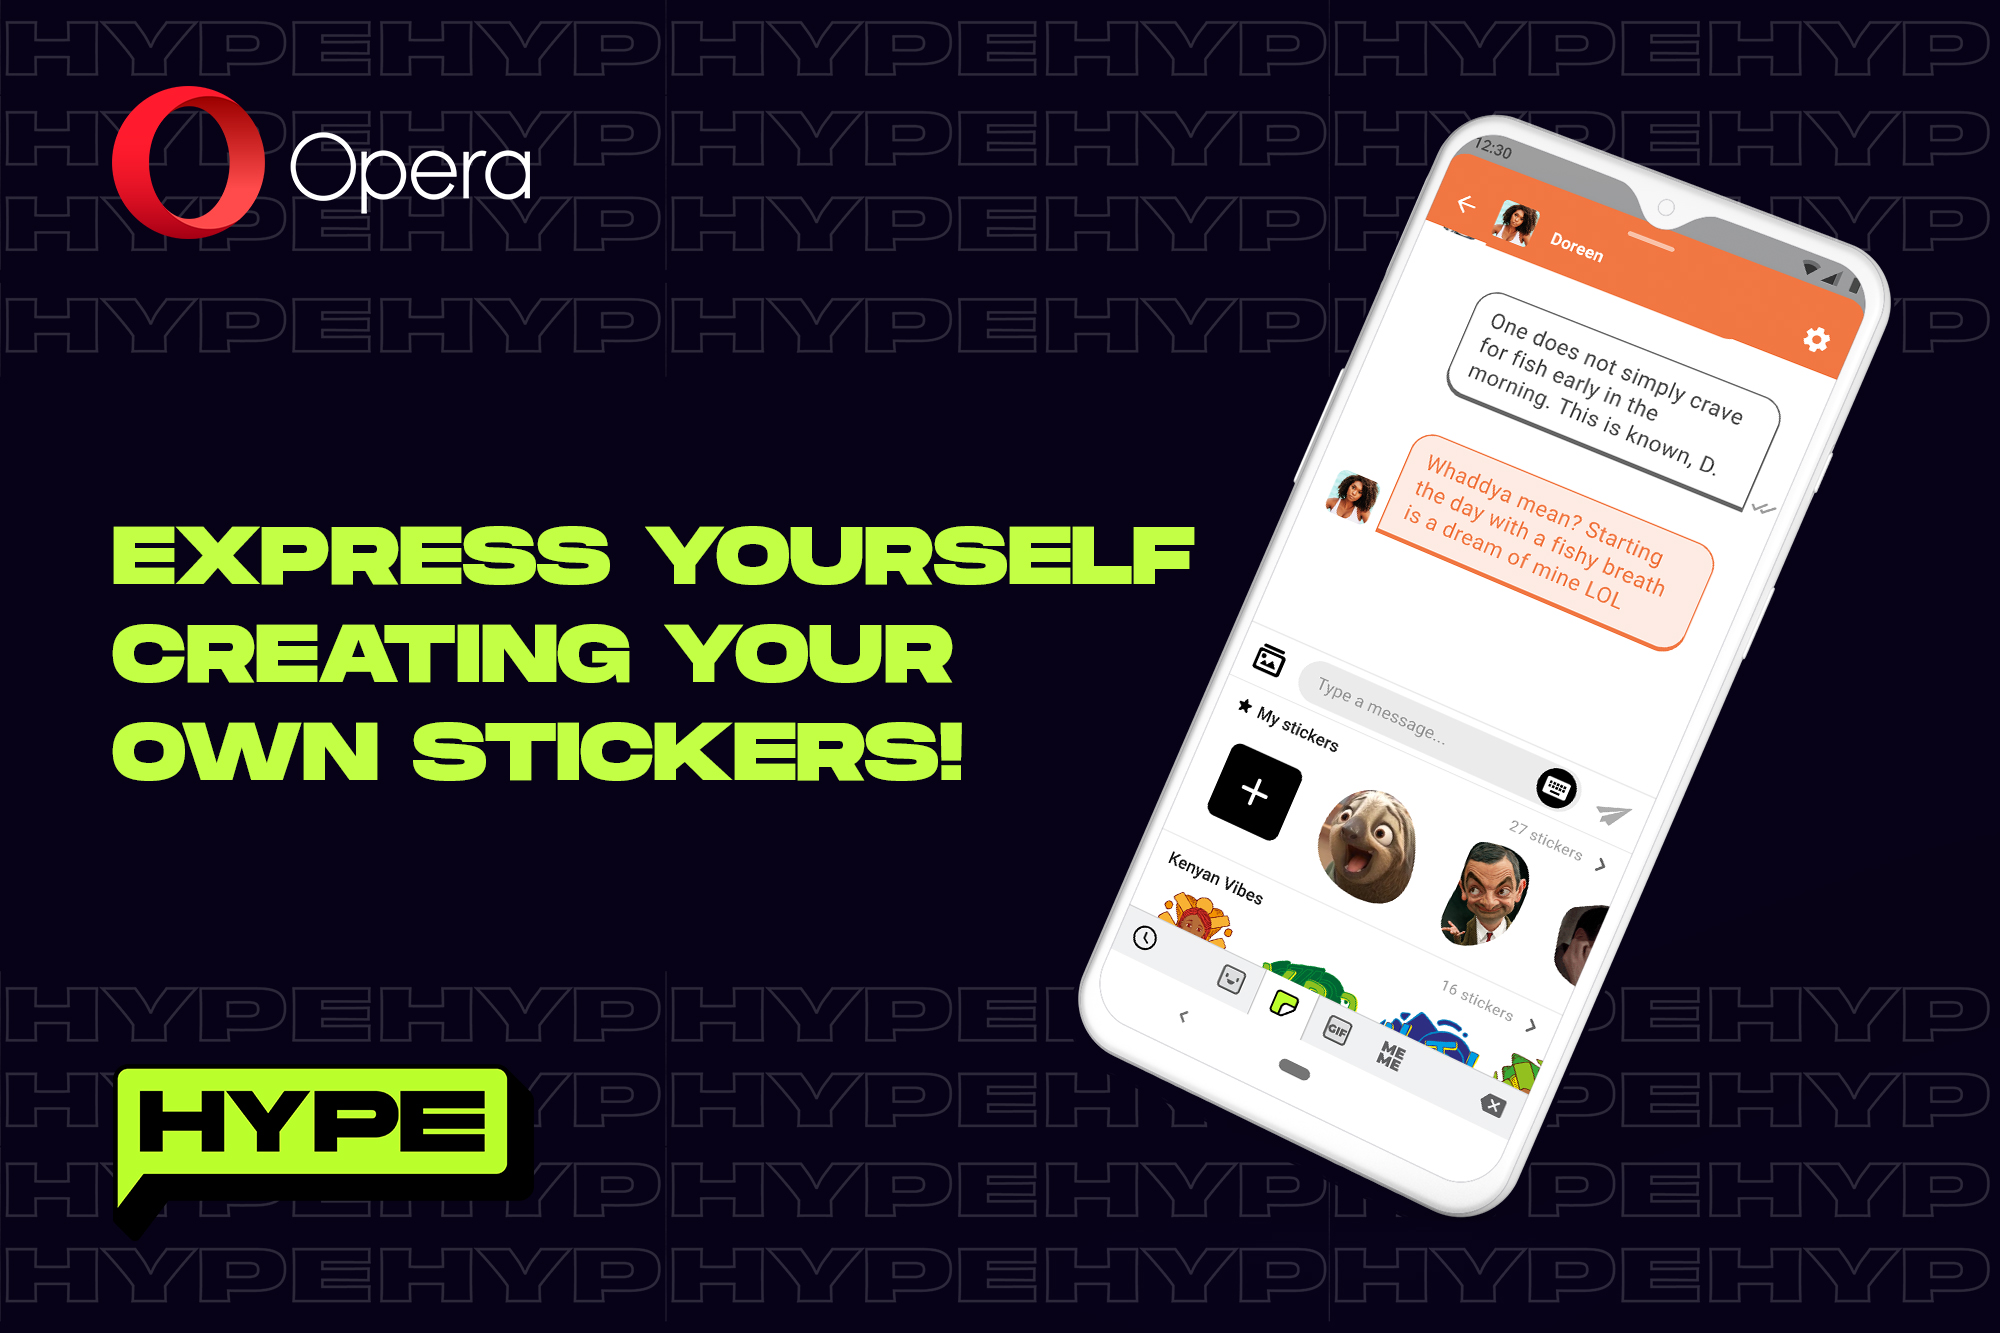 Hype now allows Opera users to crate own stickers